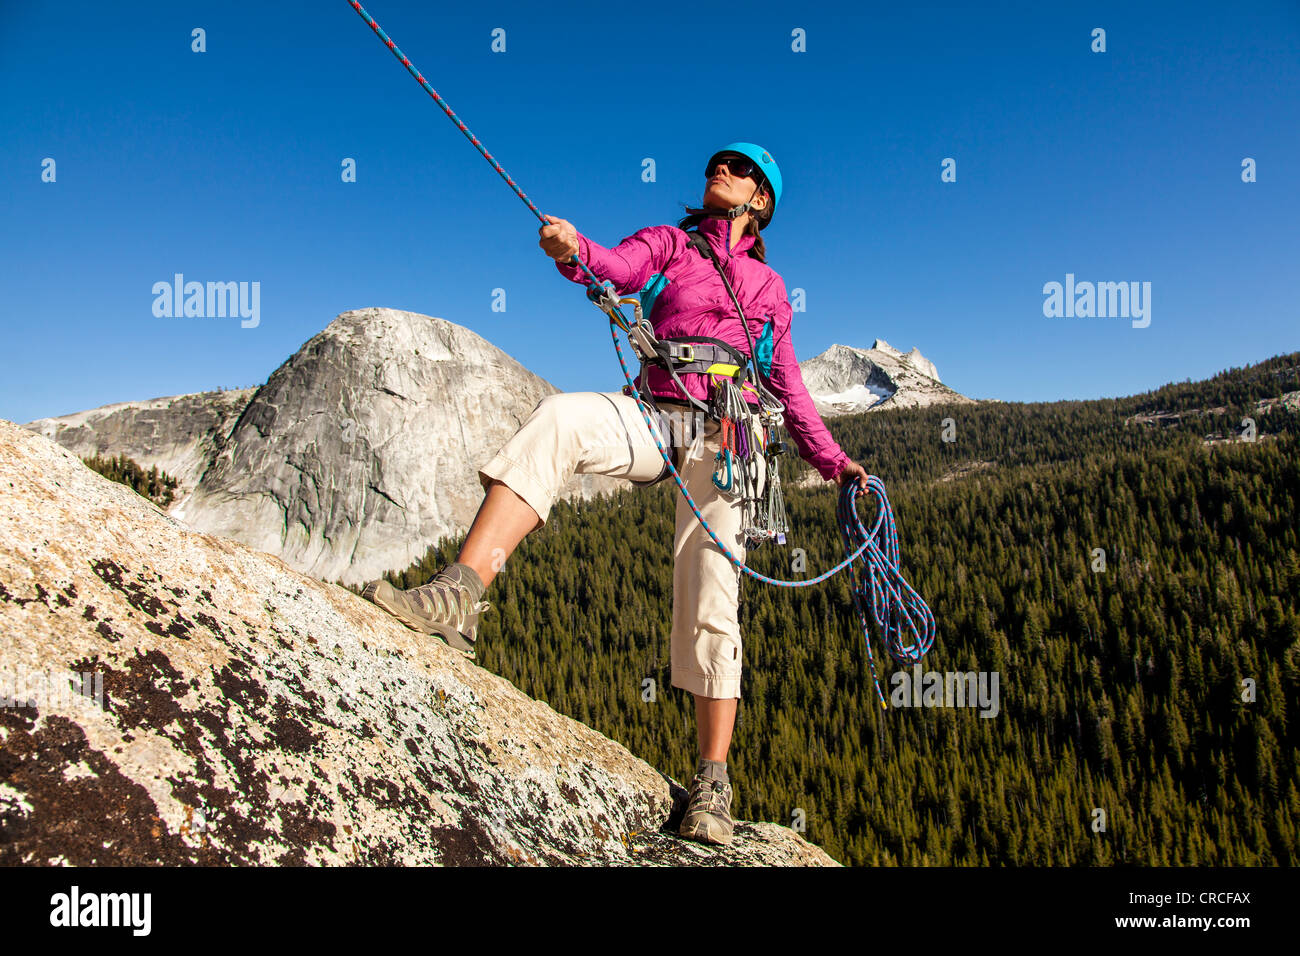 Climber rappelling from the summit after a challenging ascent. Stock Photo